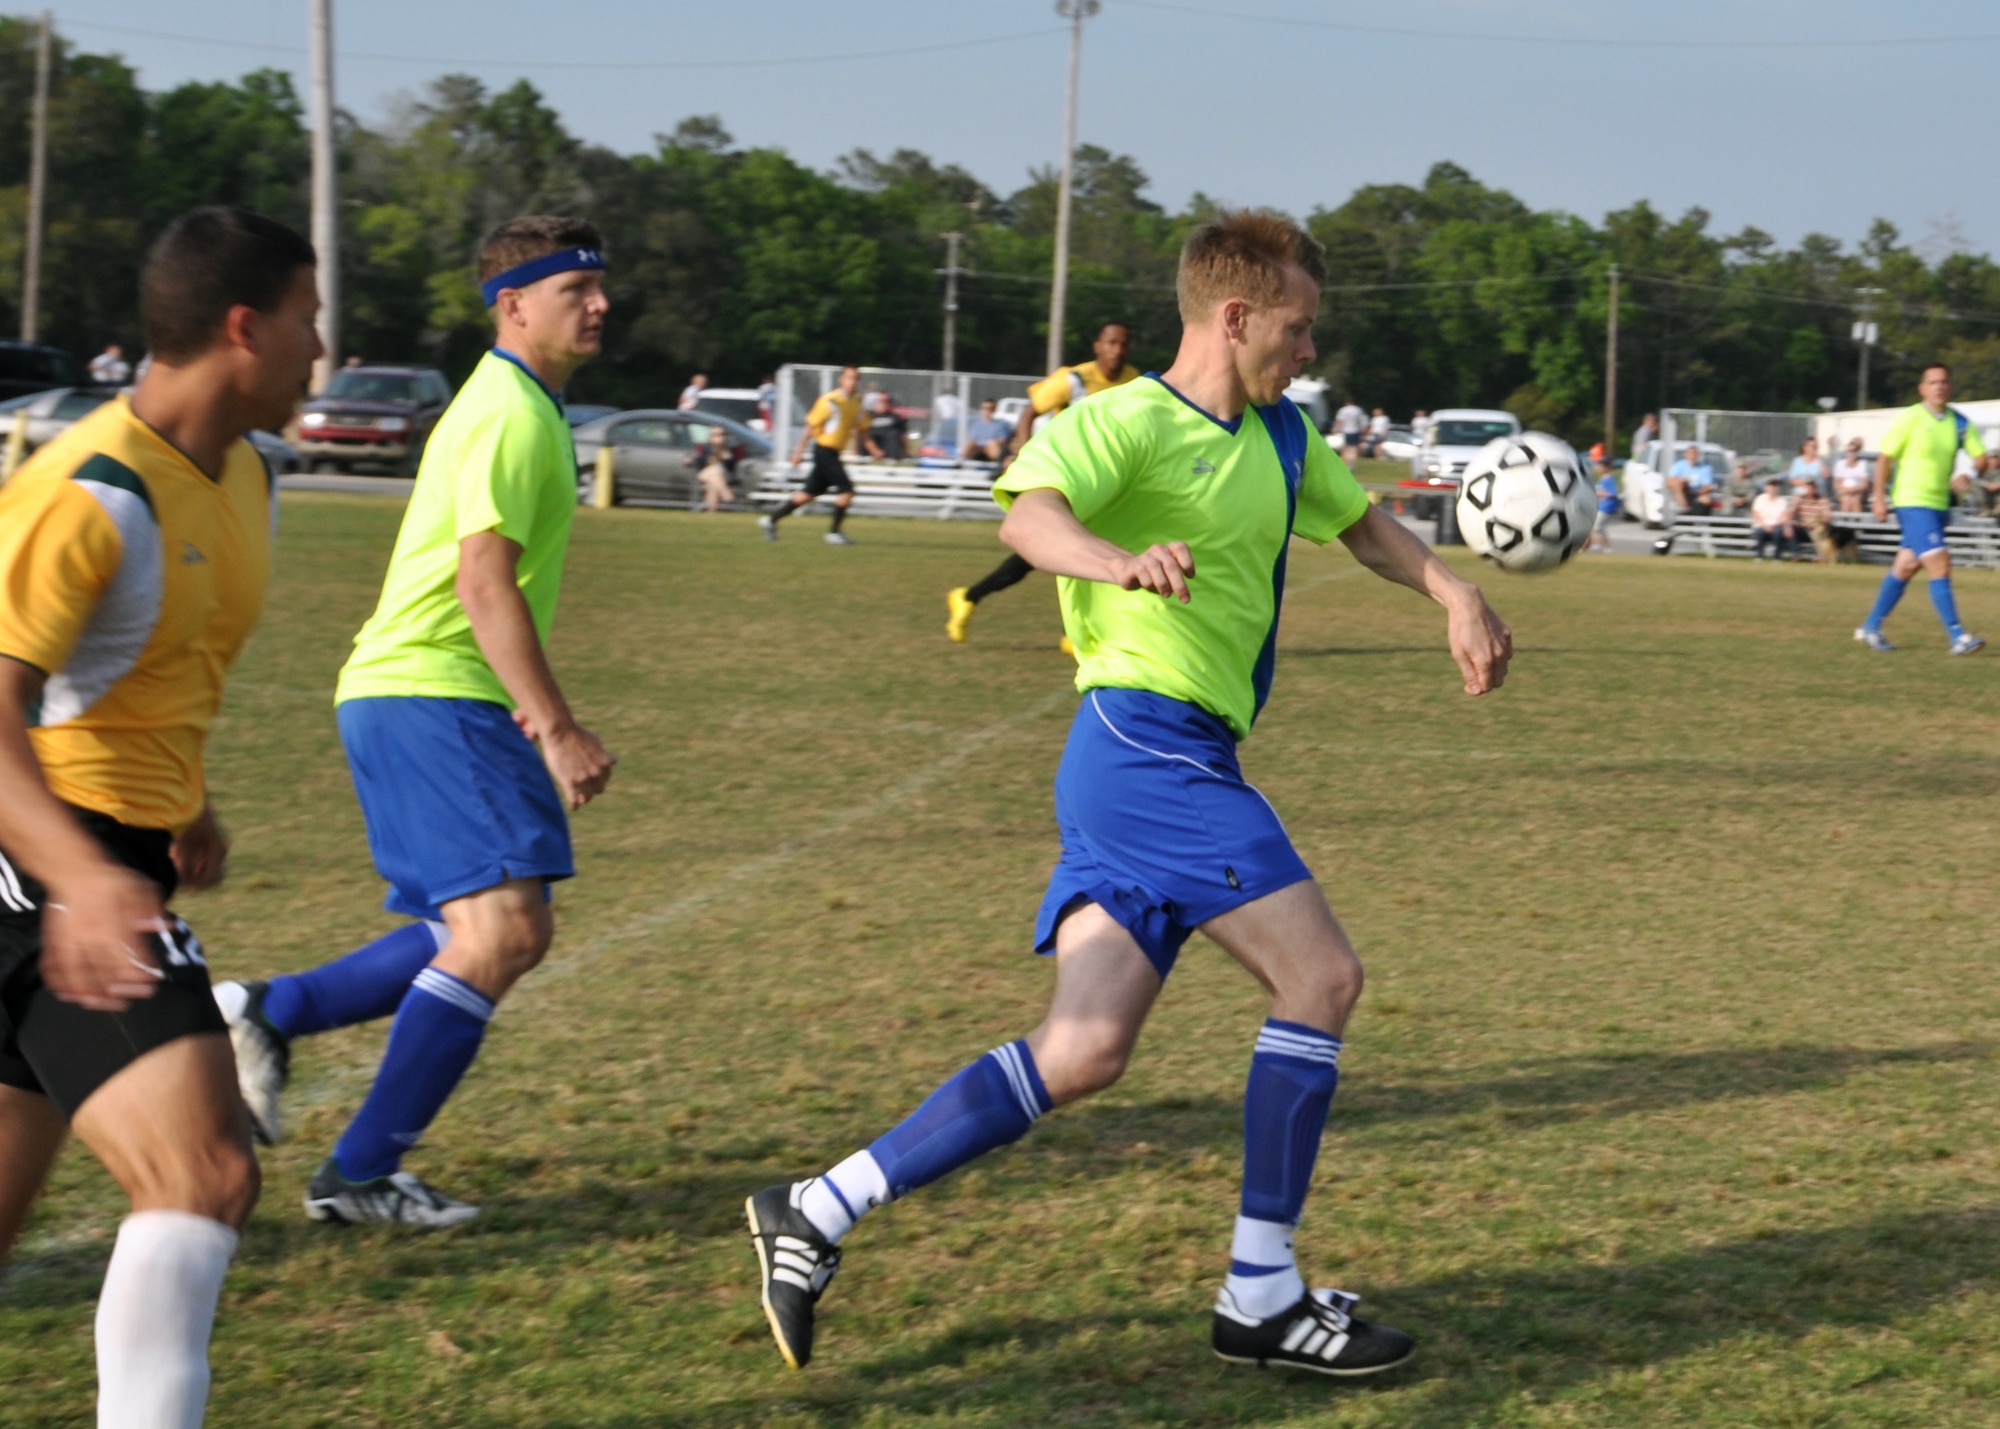 EGLIN AIR FORCE BASE, Fla. – A 53rd Wing player narrowly avoids a hand penalty during a drive downfield April 22. The 46th Test Wing reclaimed the title winning 2-1 against the 53rd during the intramural soccer championship. 53rd was the reigning champs, beating the 46th in a sudden death shootout in overtime last year. (U.S. Air Force photo/ Airman 1st Class Anthony Jennings)